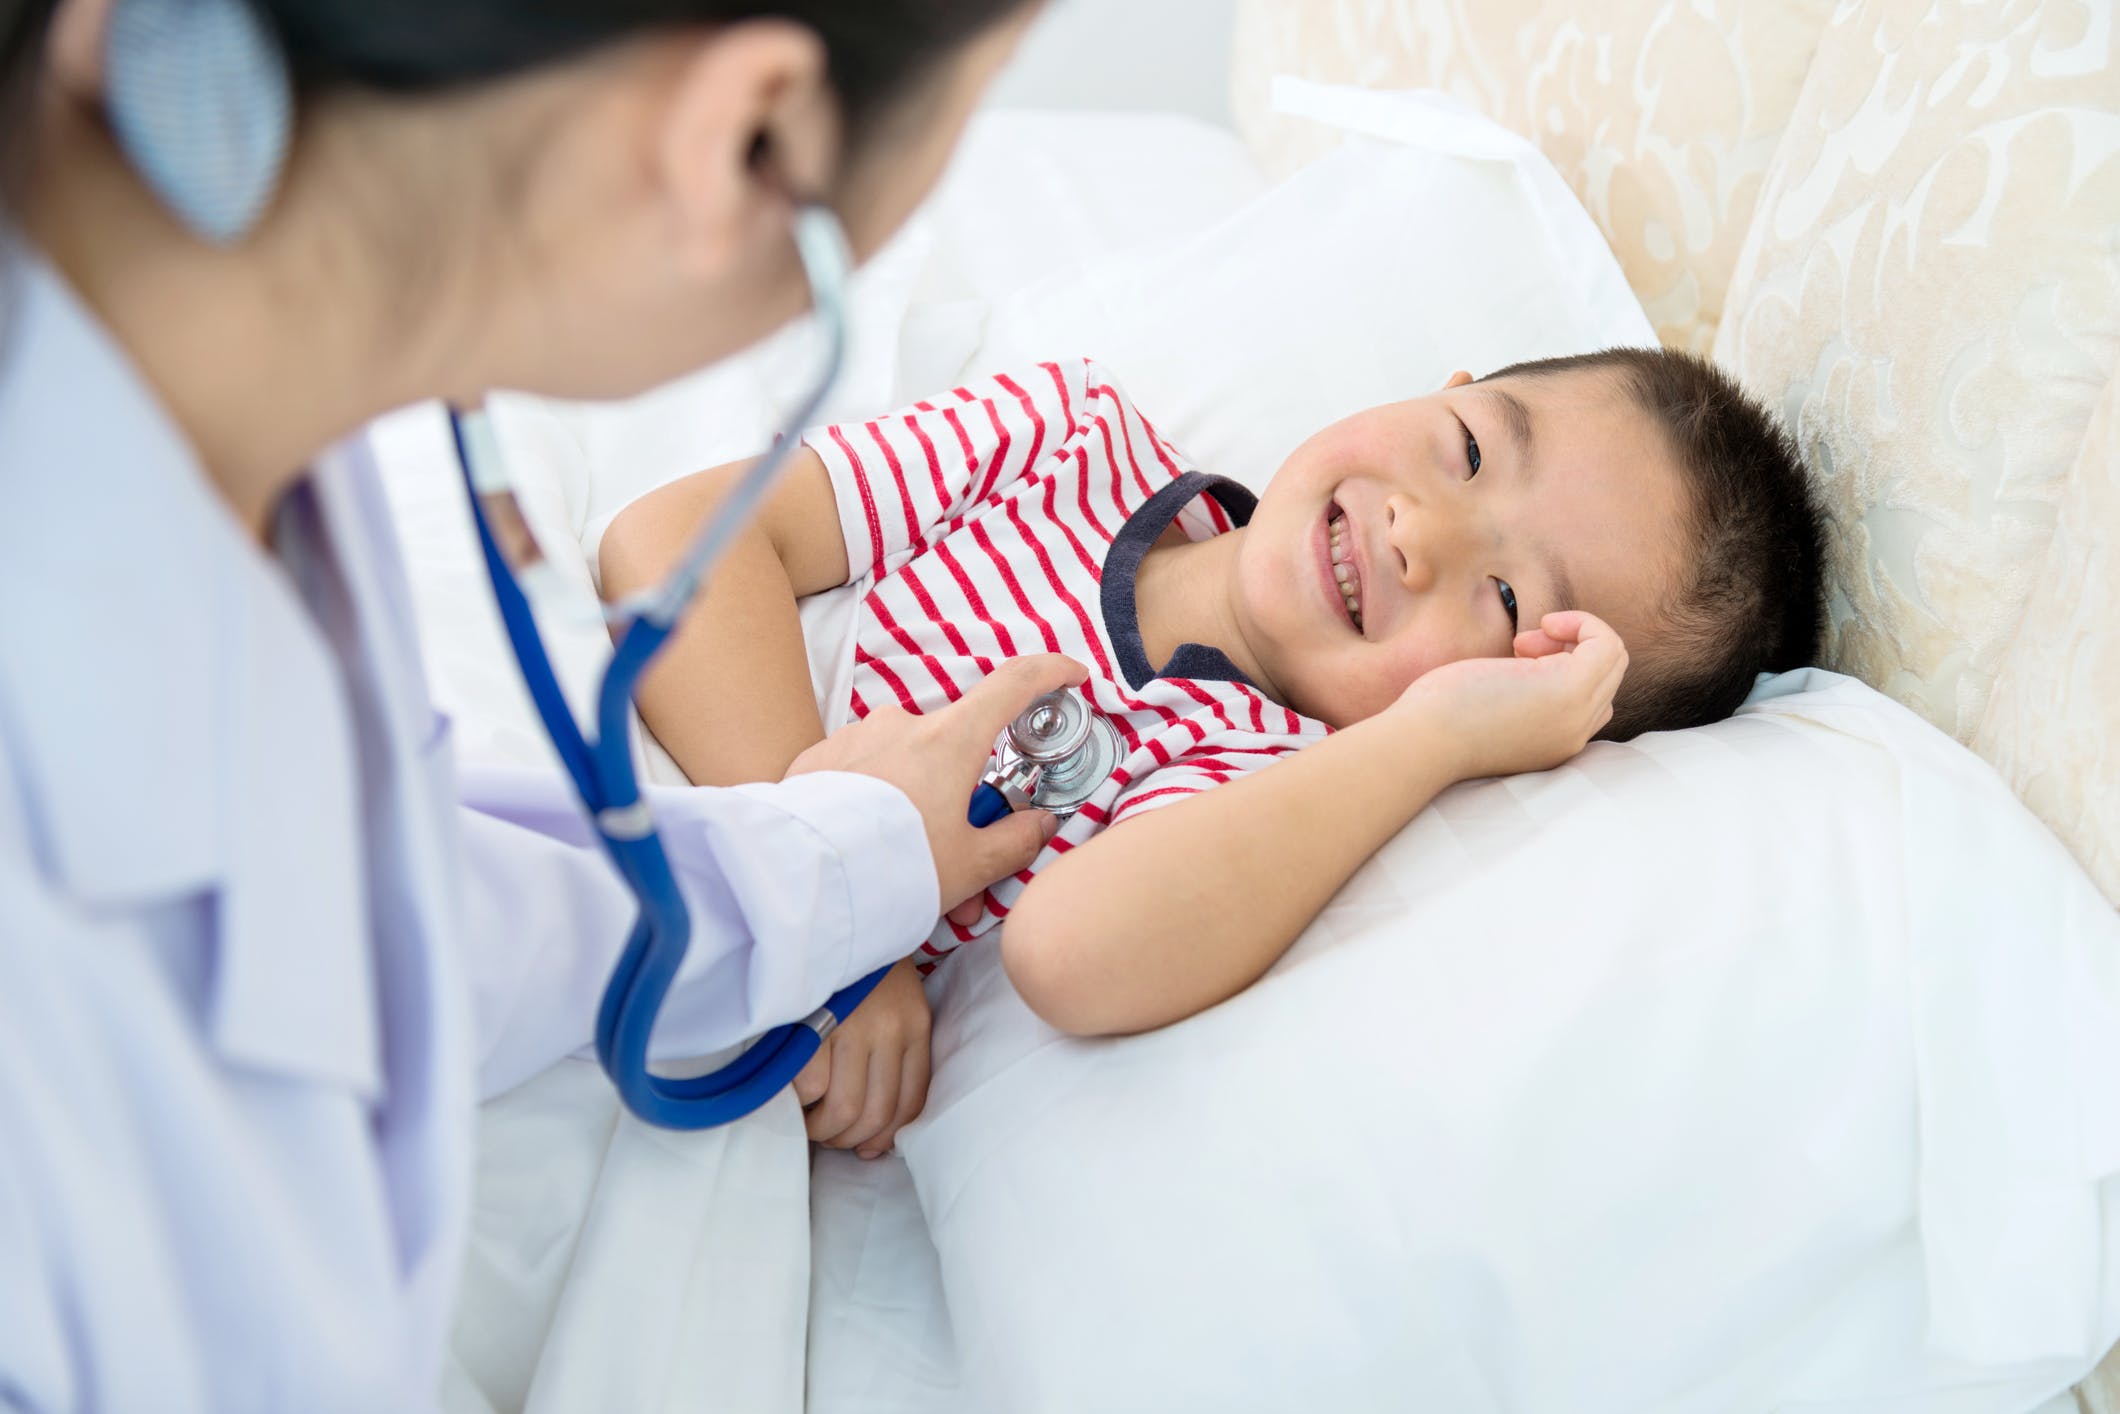 Are You Too Obsessed with Your Child’s Health?